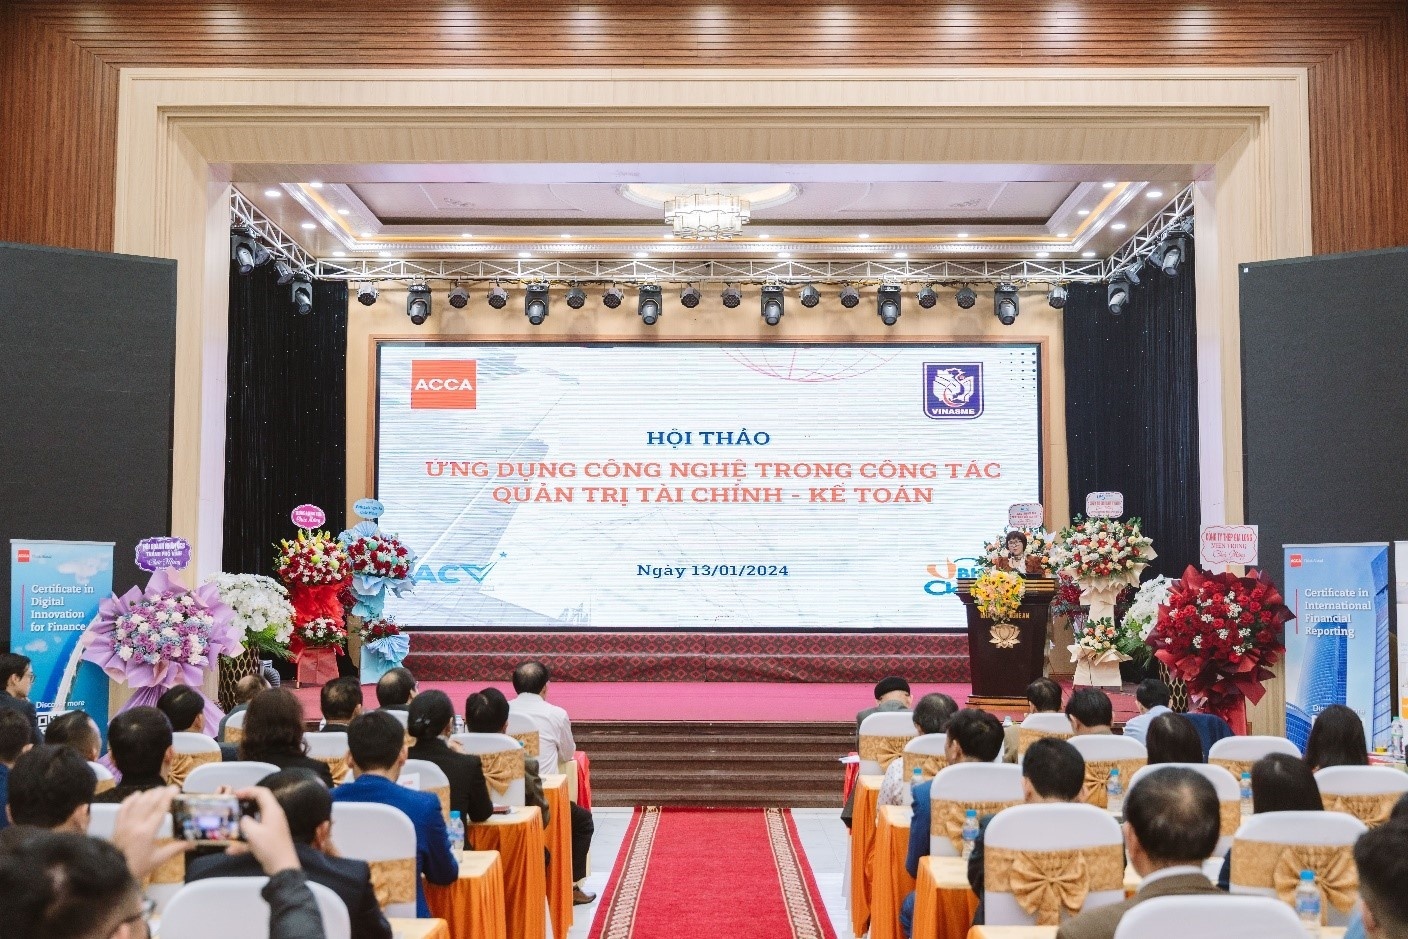 ACCA partners with VINASME to empower businesses in Nghe An province